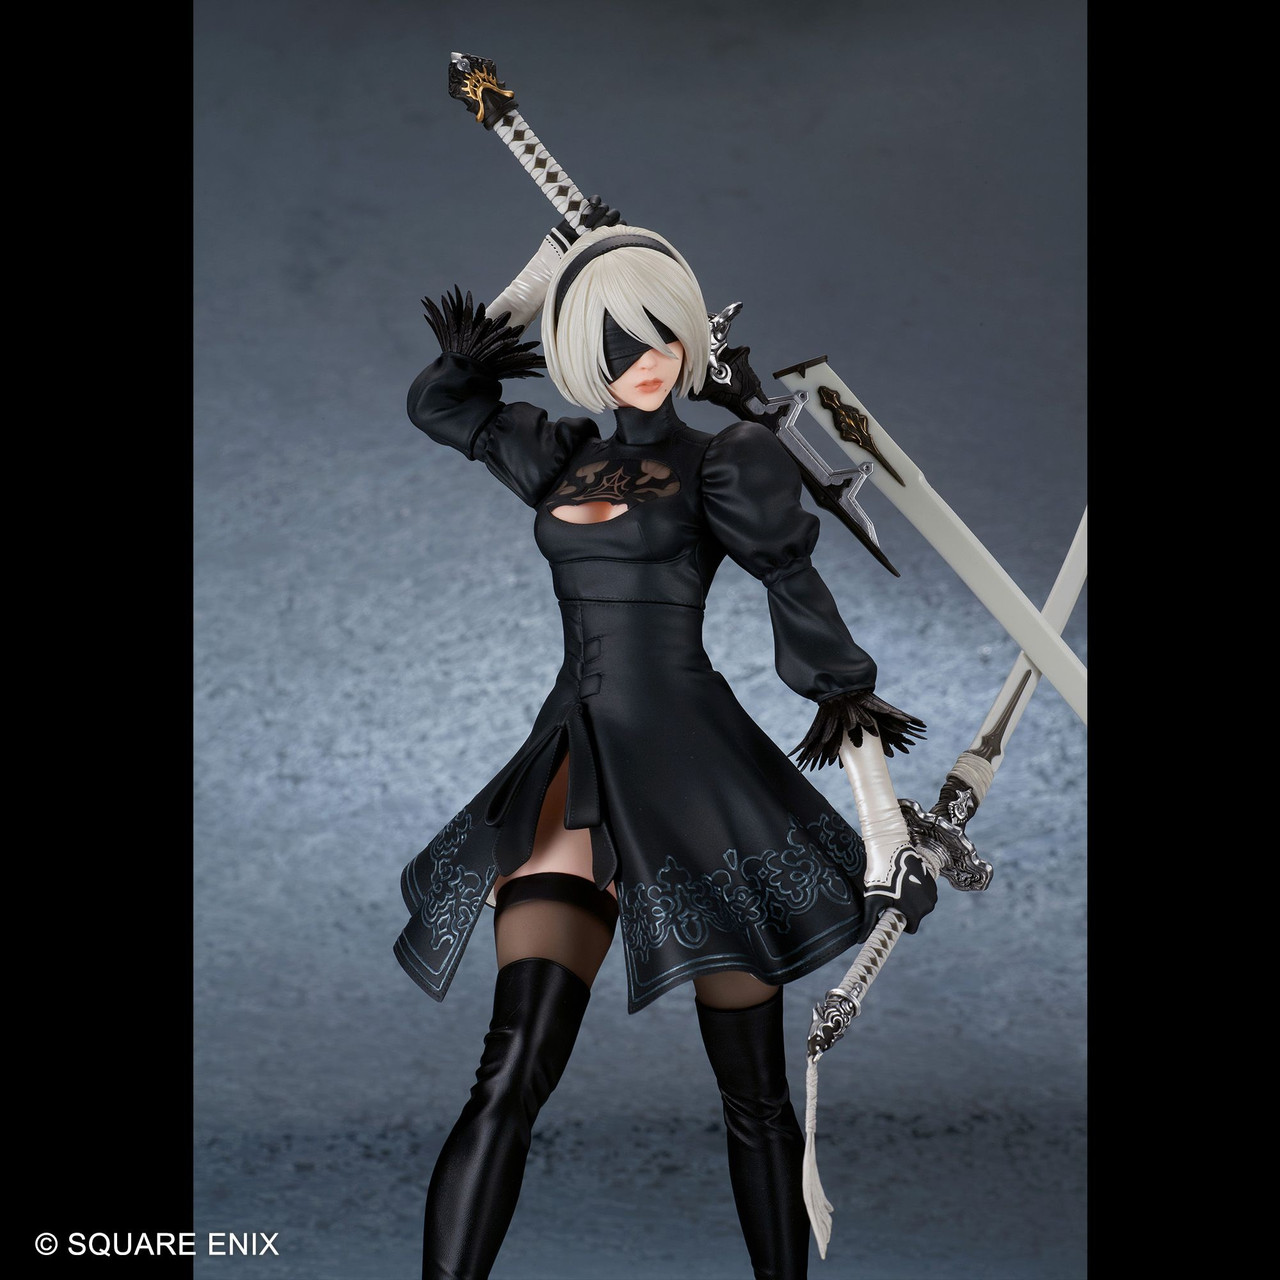 Nendoroid NieR Automata 2B (YoRHa No.2 Type B) Non-Scale Plastic Painted  Action Figure Resale SE36790 - Discovery Japan Mall